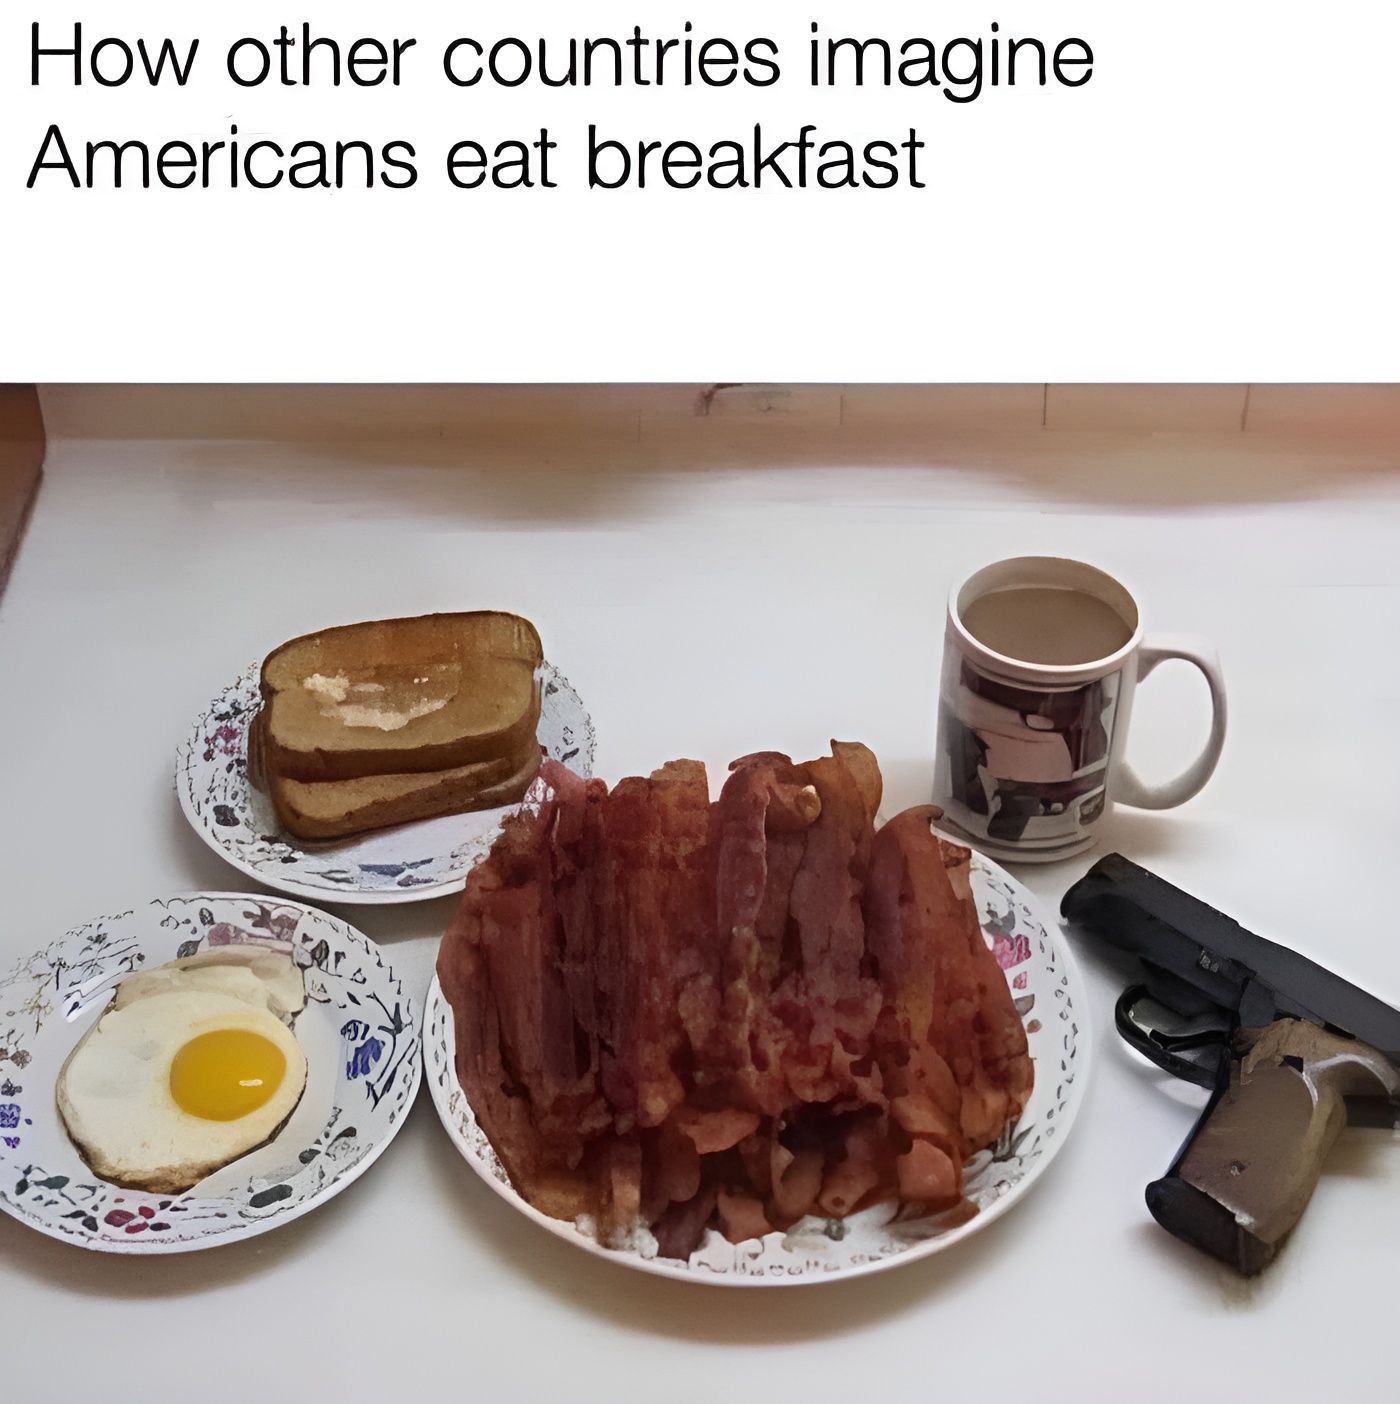 A photo showing three plates on a table: one with a single fried egg, another with a stack of toast, and a third overflowing with bacon. Nearby is a mug filled with what looks like coffee and a handgun. The text above reads, "How other countries imagine Americans eat breakfast.